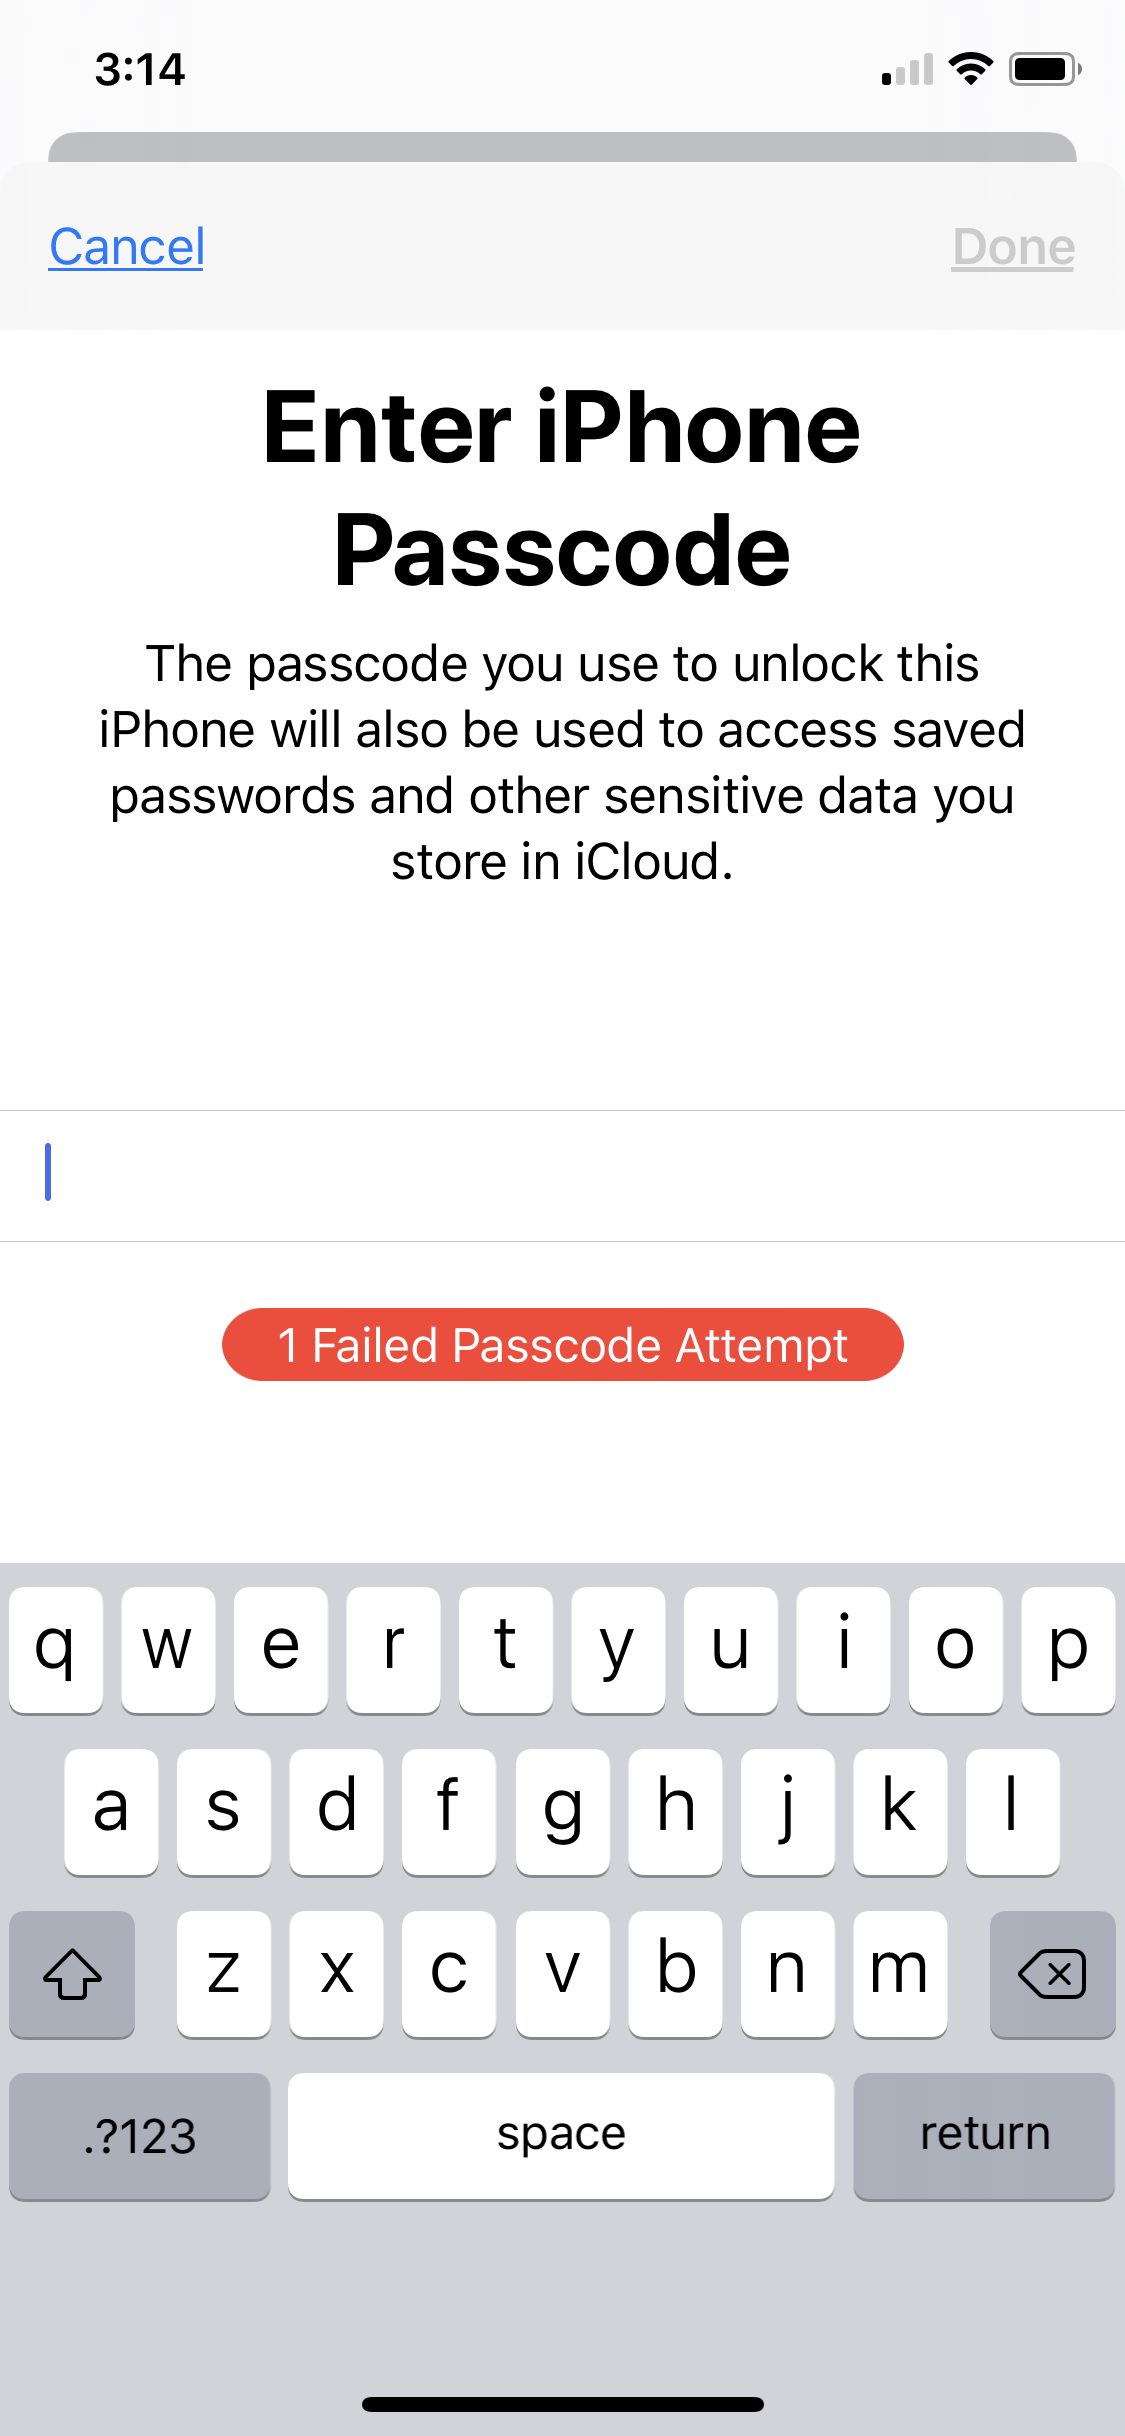 How To Recover Saved Passwords On Your iPhone: Unlocking The Keychain